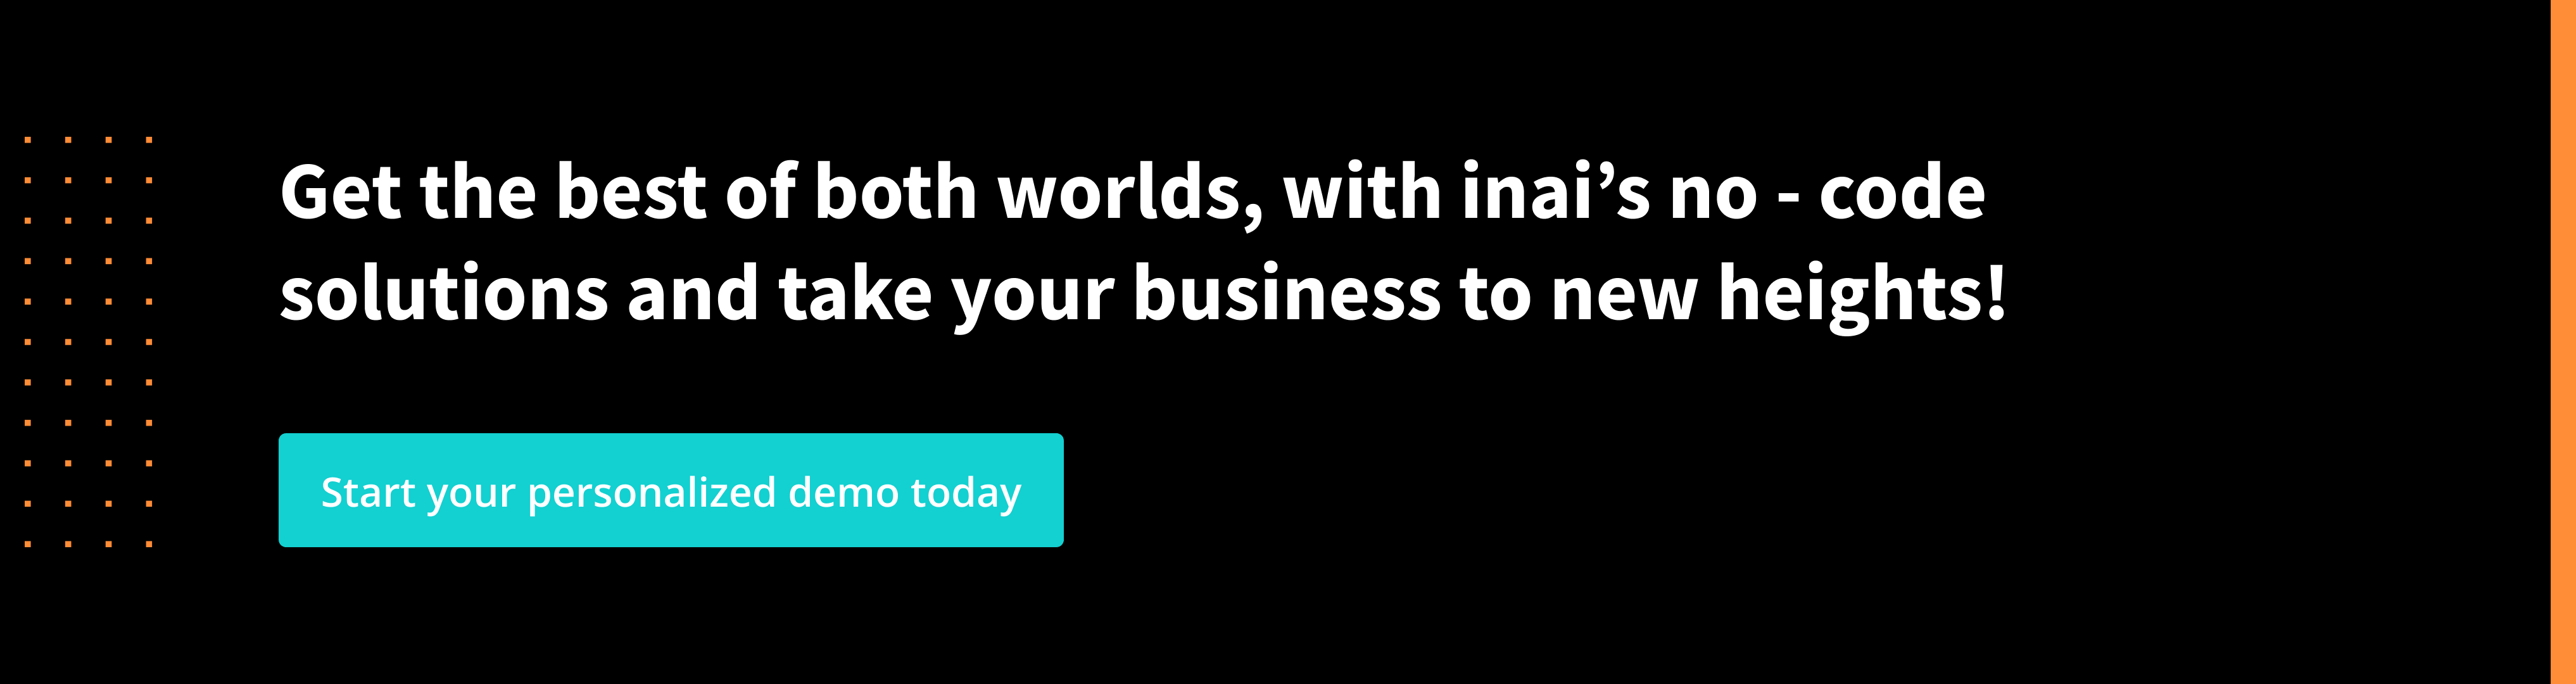 Expand your business globally with inai